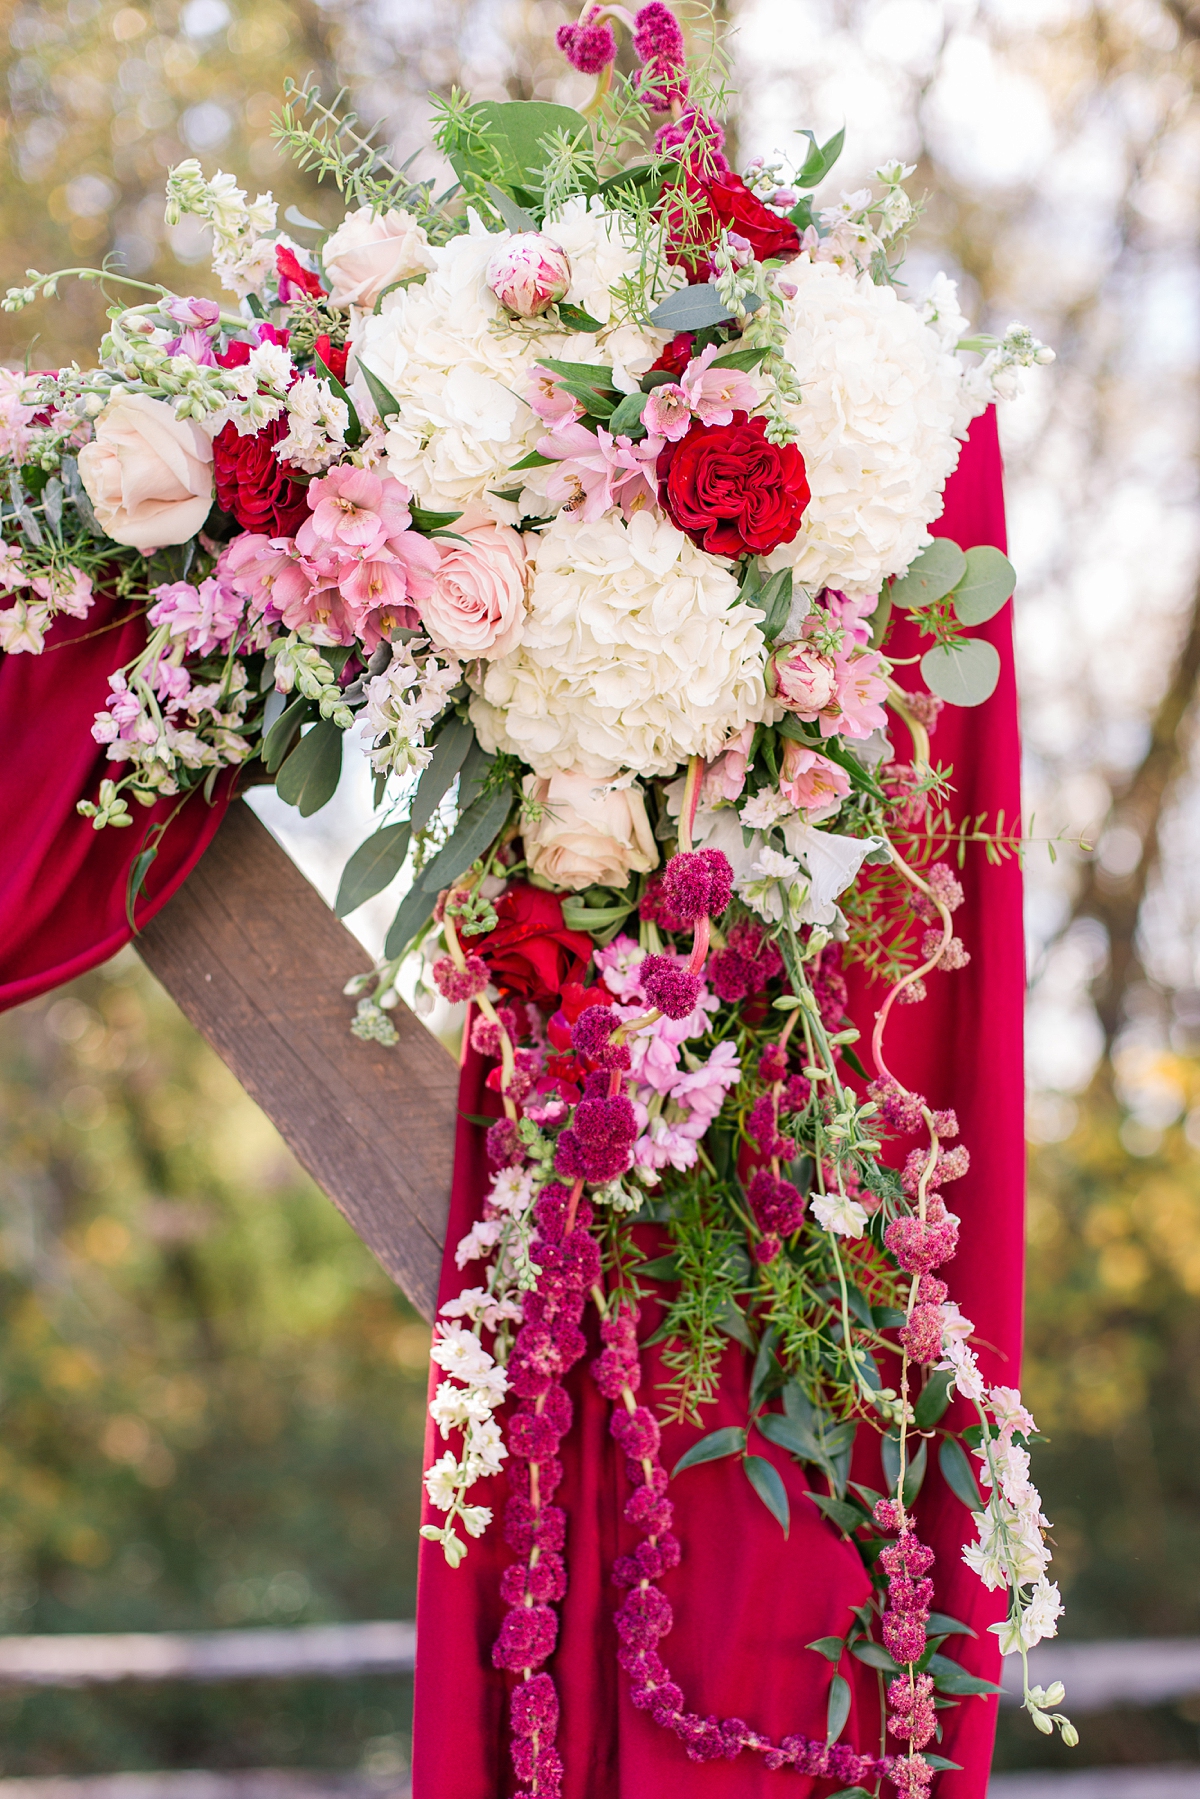 Ceremony Arch Florals at Hanover Tavern Fall Wedding. Wedding Photography by Richmond Wedding Photographer Kailey Brianne Photography. Florals by Lavender Lane Flowers & Gifts